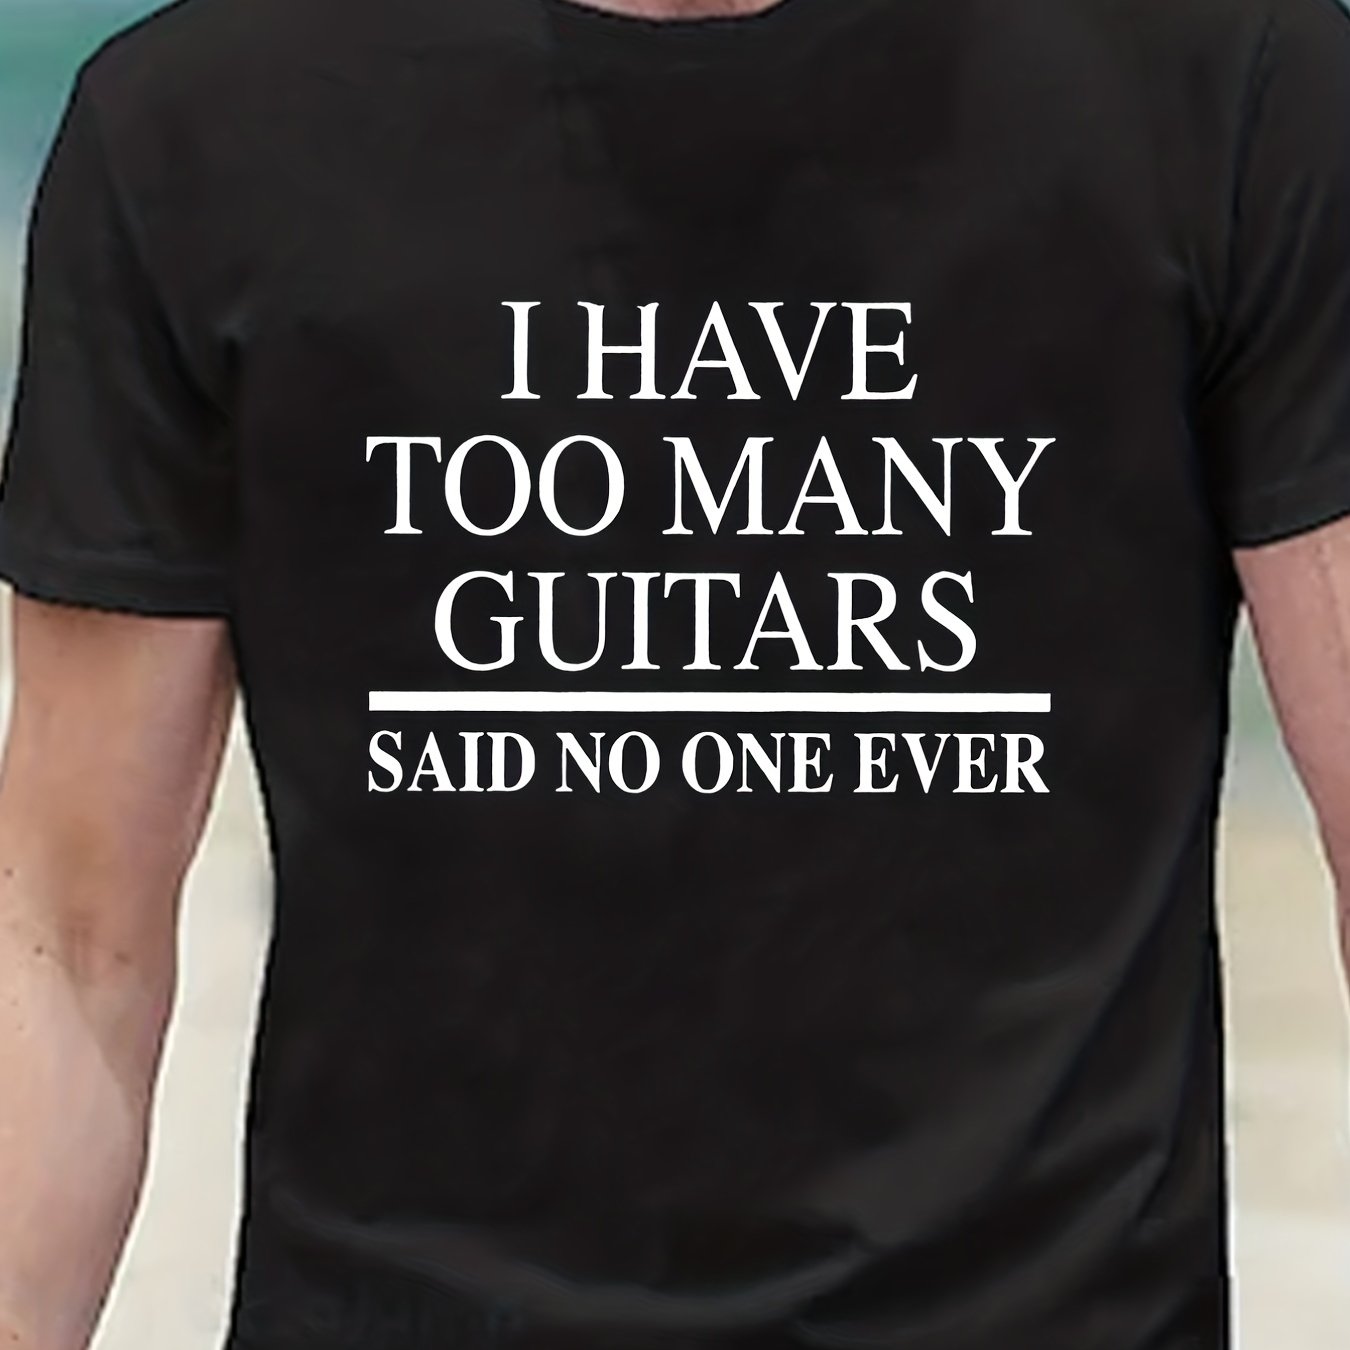 Tees For Men, Funny 'Too Many Guitars' Print T Shirt, Casual Short Sleeve Tshirt For Summer Spring Fall, Tops As Gifts, For Guitar Players